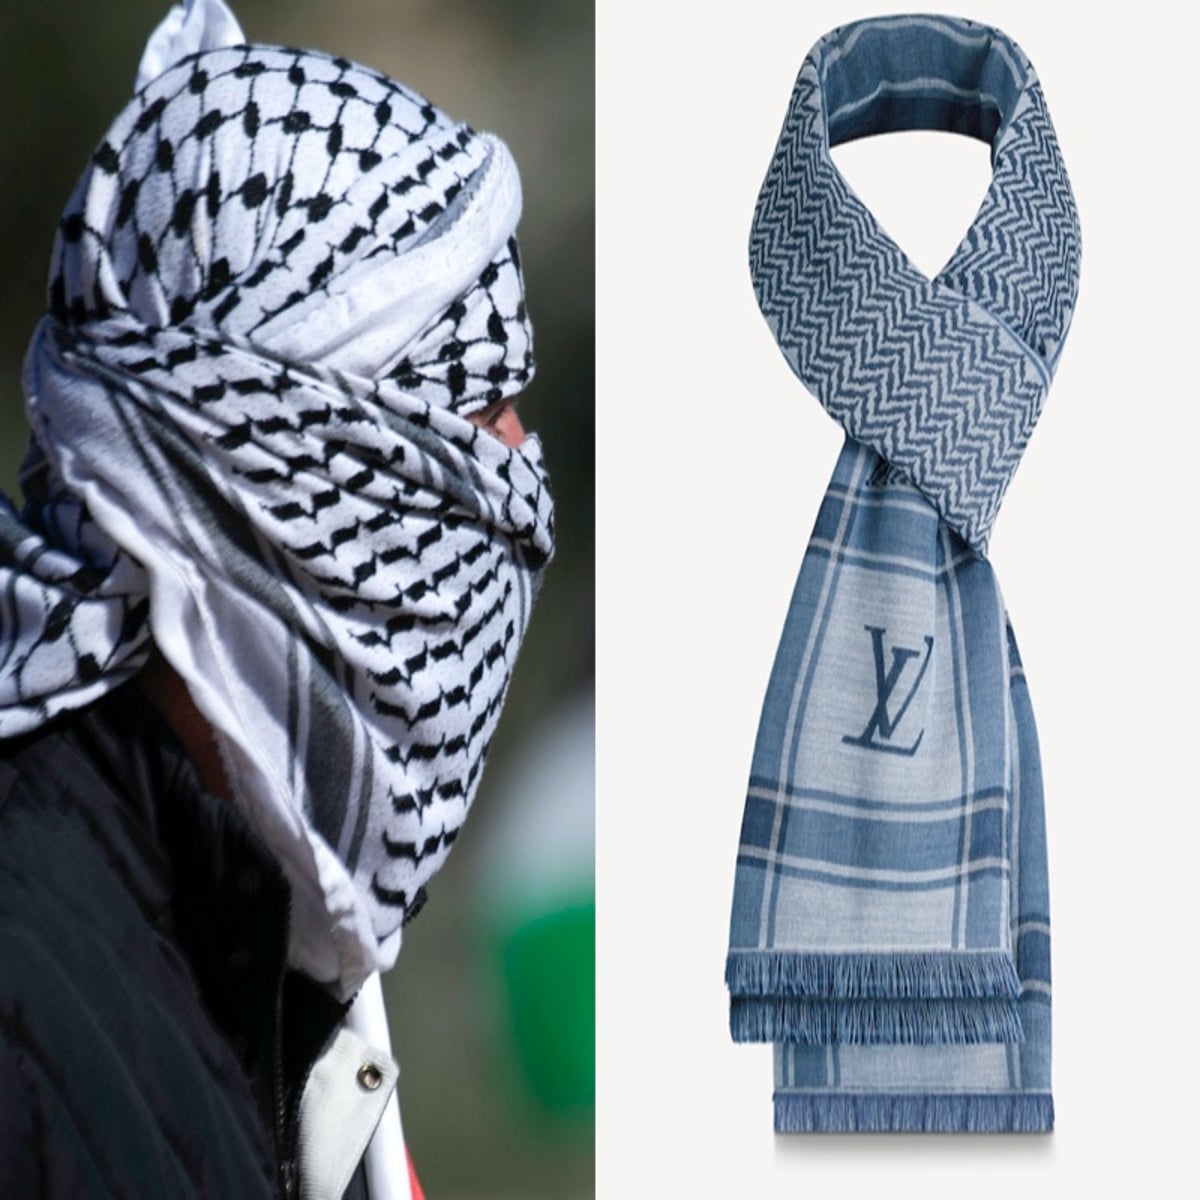 Louis Vuitton pulls $705 blue and white 'keffiyeh stole' after backlash